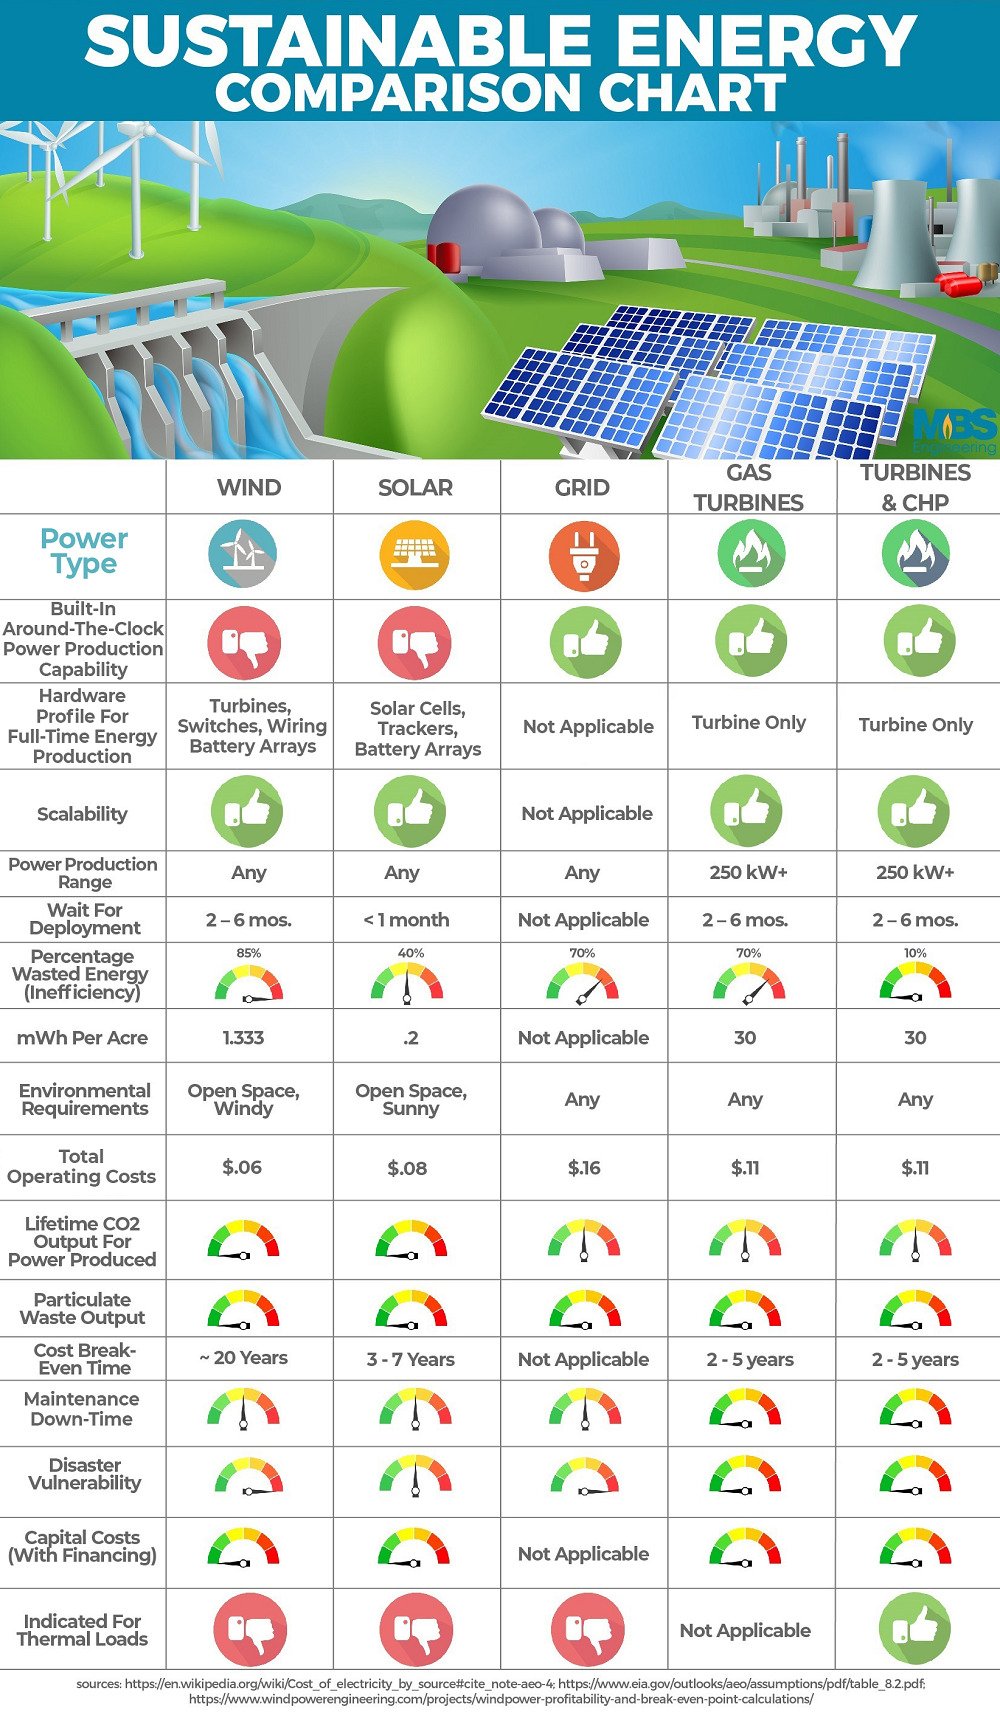 final-sustainable-energy-comparison-chart-reduced_orig